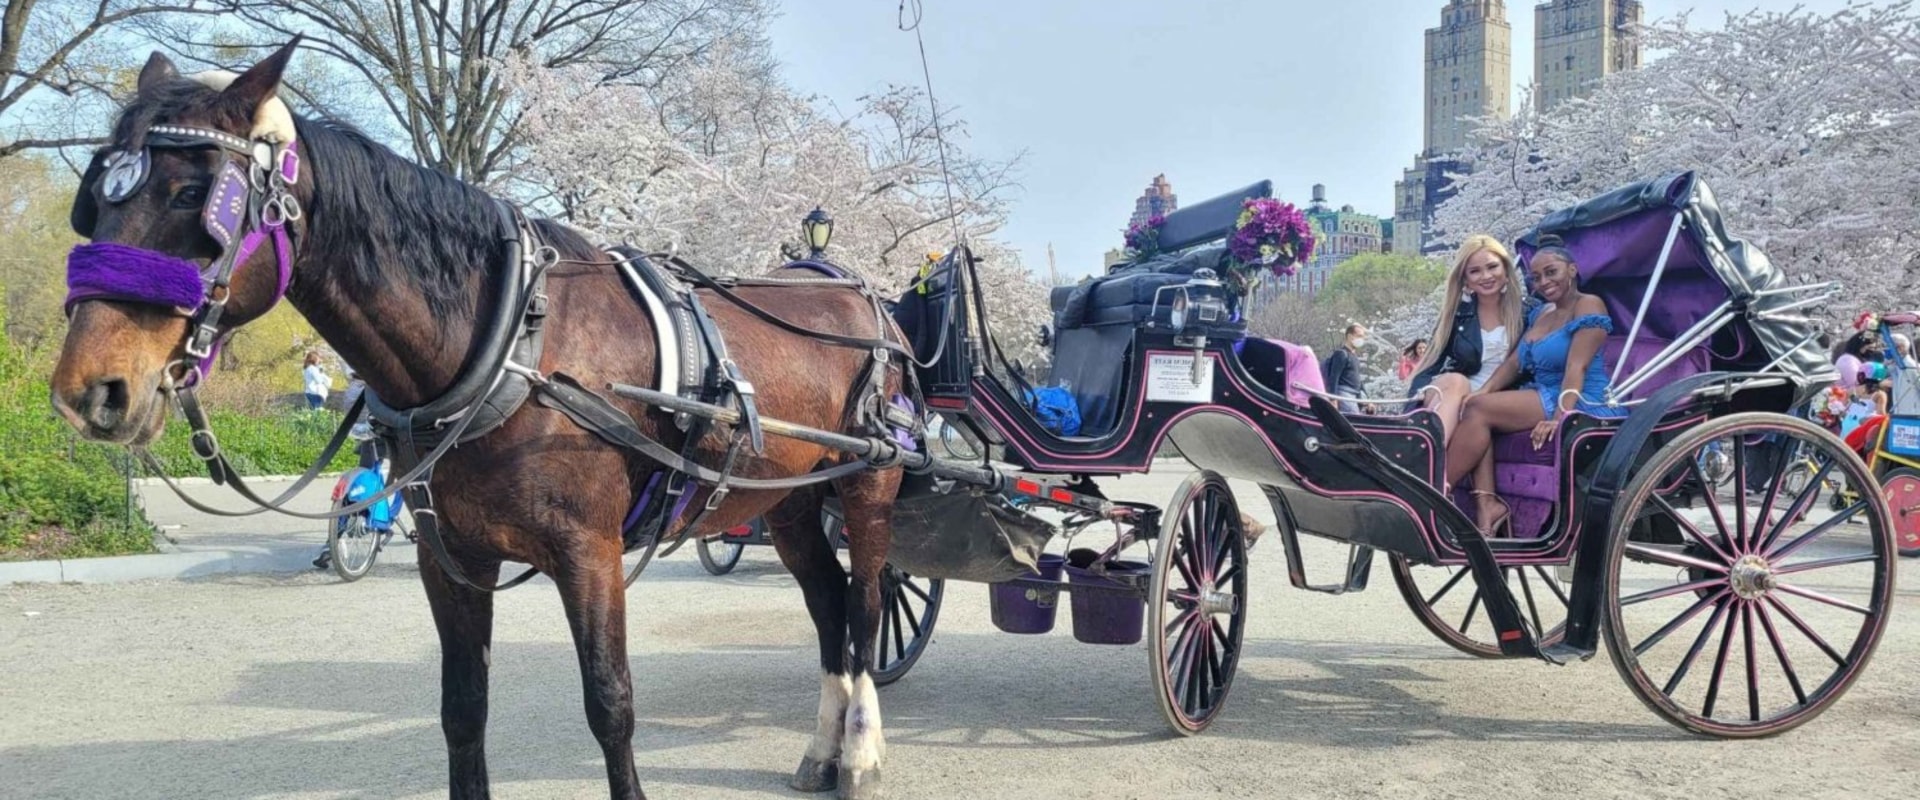 Discover the Magic of Famous Landmarks on a Carriage Tour